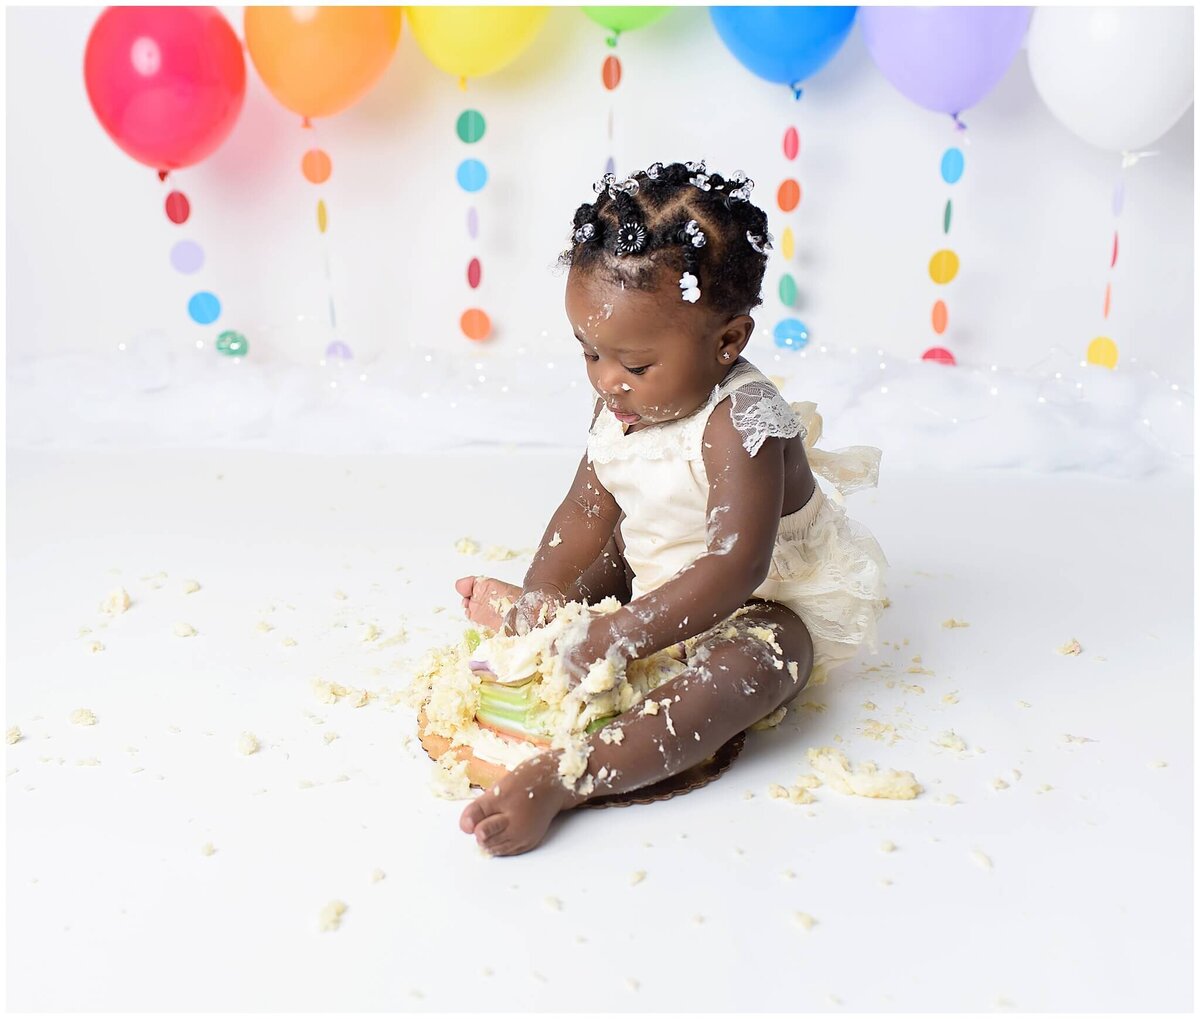 A girl's cake smash session, capturing her playful and carefree spirit as she dives into a cake.